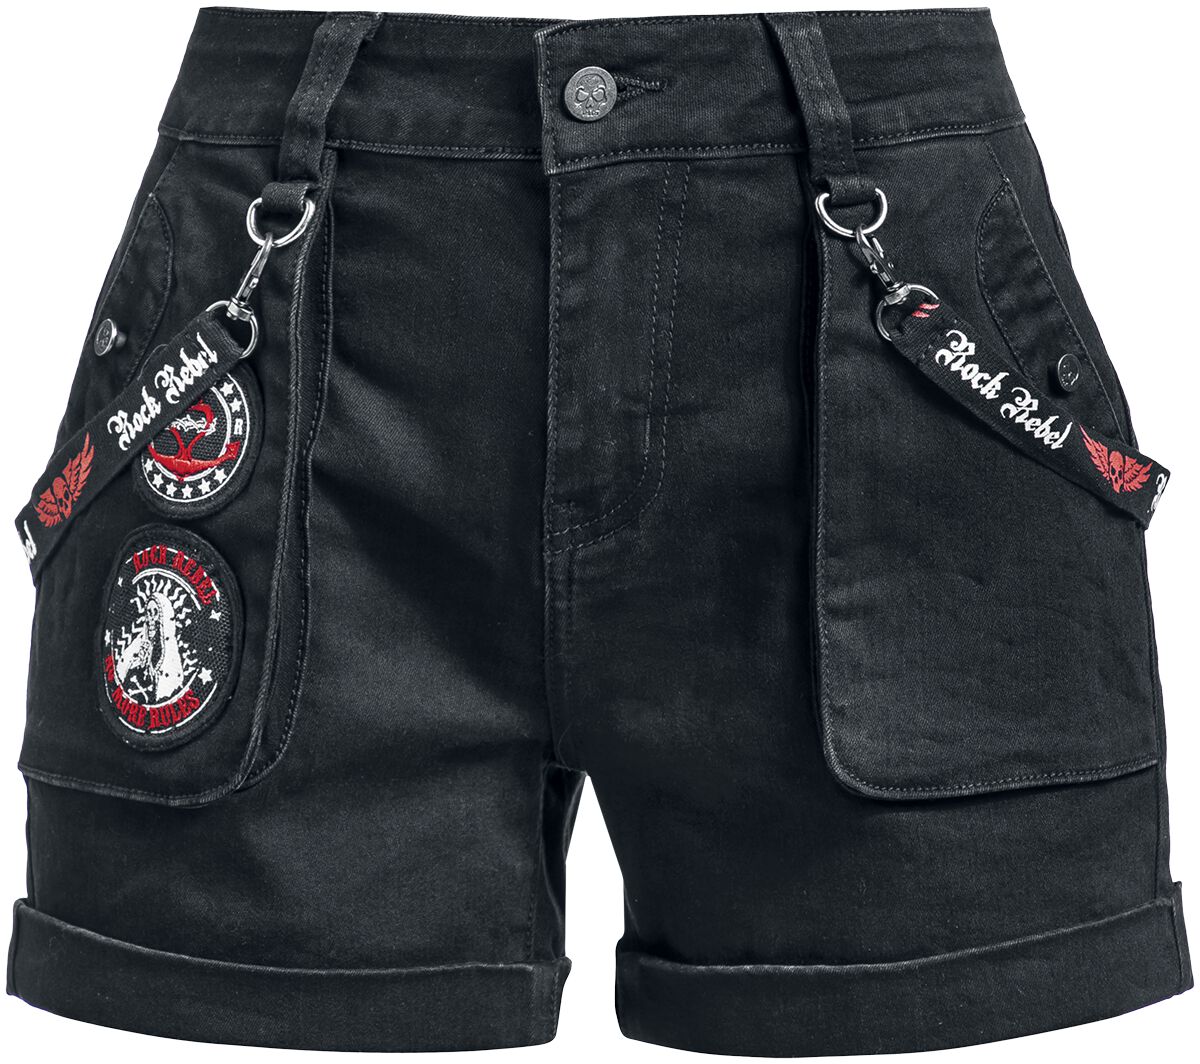 Image of Shorts di Rock Rebel by EMP - Comfy shorts with patches and straps - 27 a 29 - Donna - nero